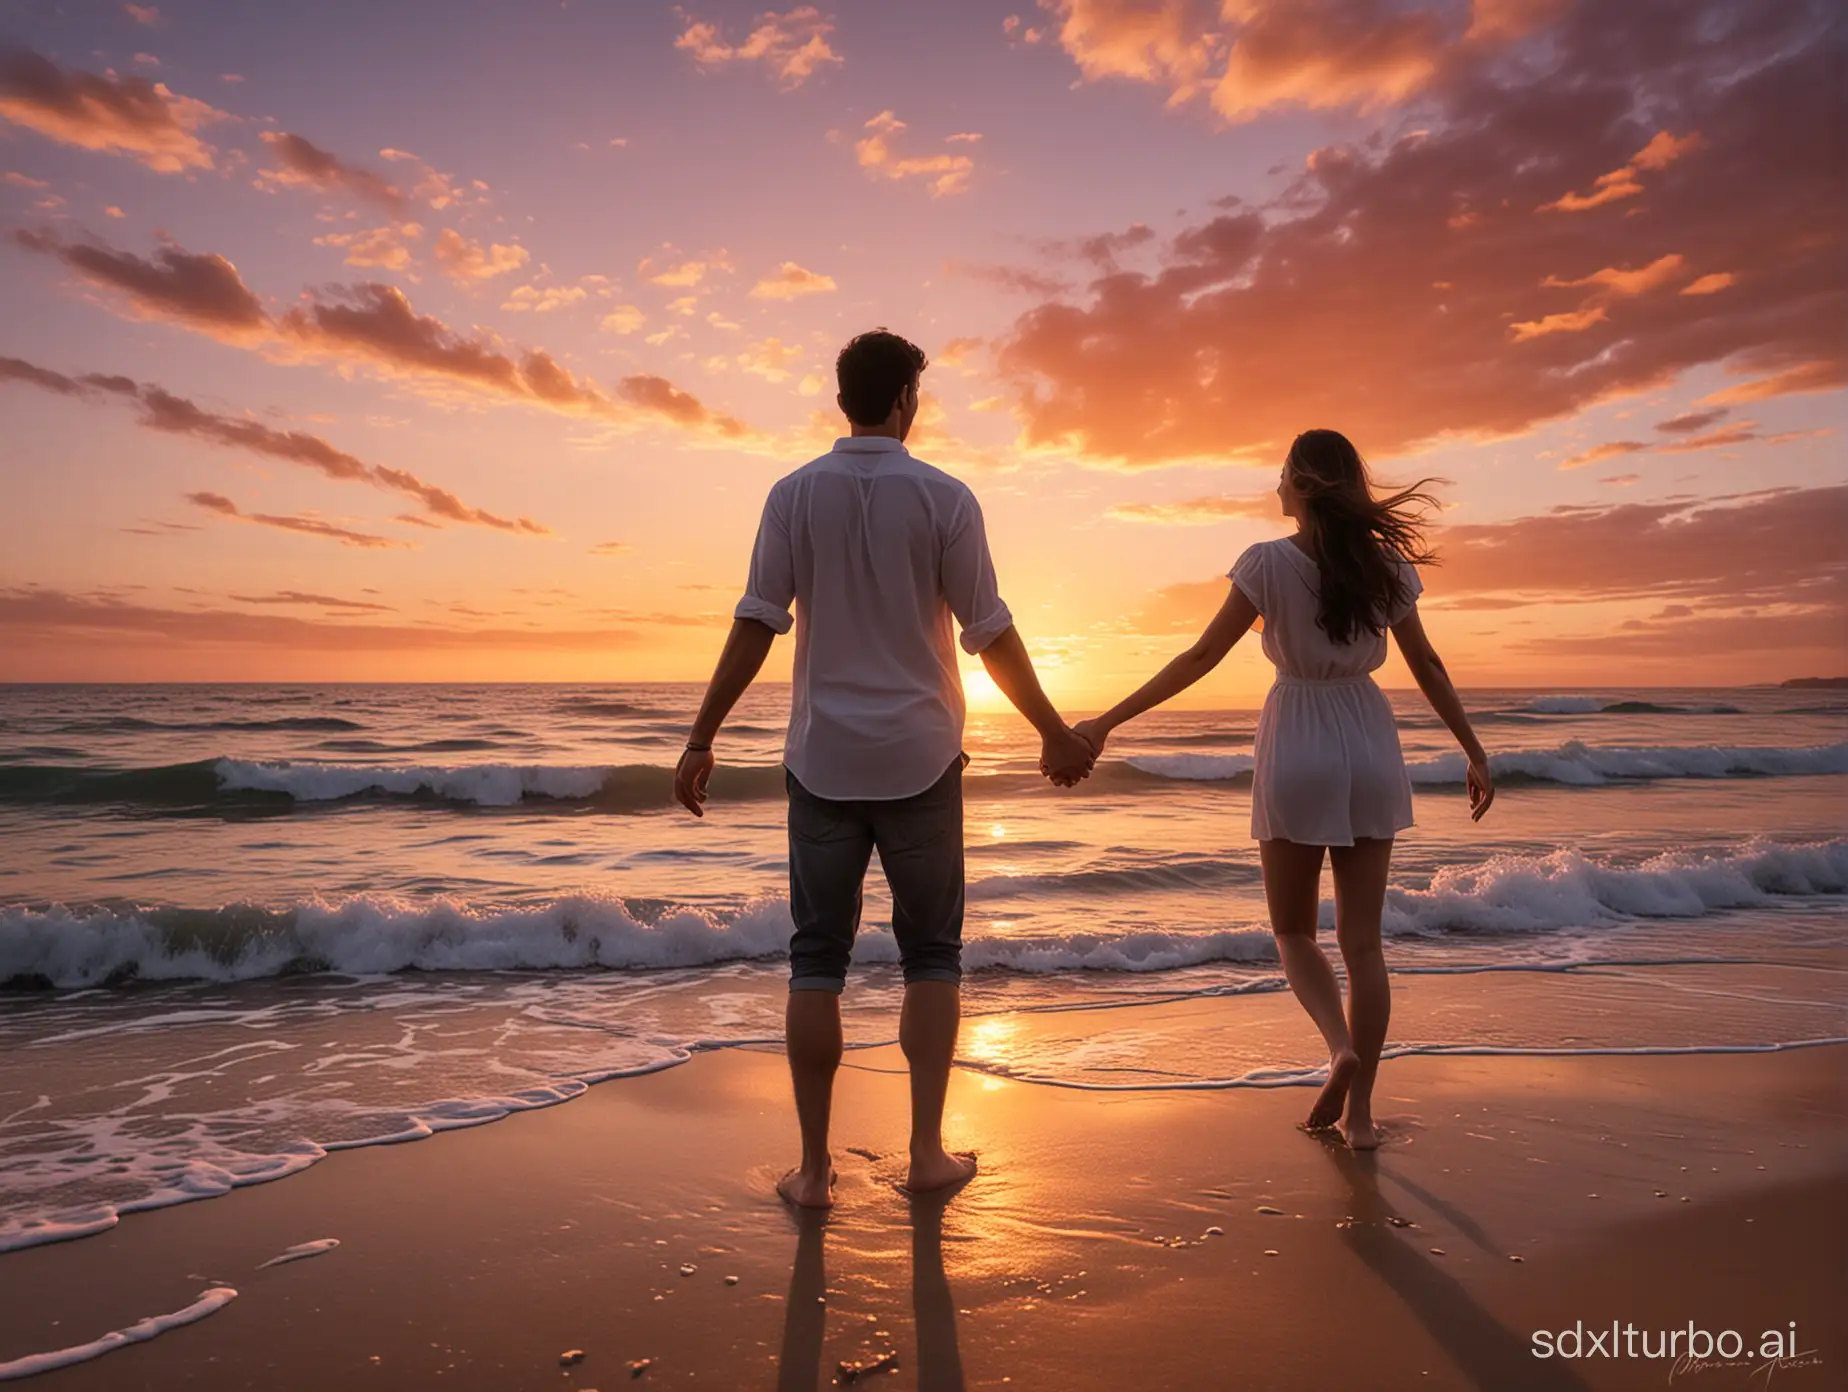 The cover photo for the "Connected Hearts" group captures a warm and inspiring scene. It depicts a young couple, beaming with joyful smiles, holding hands, with a stunning sunset backdrop. This image embodies the essence of the group - connection, friendship, and love. It serves as a reminder that life is full of possibilities and that the group is a space where friendships can be forged and love stories can blossom. It's an open invitation to join the community and embark on a journey of new connections and excitement.